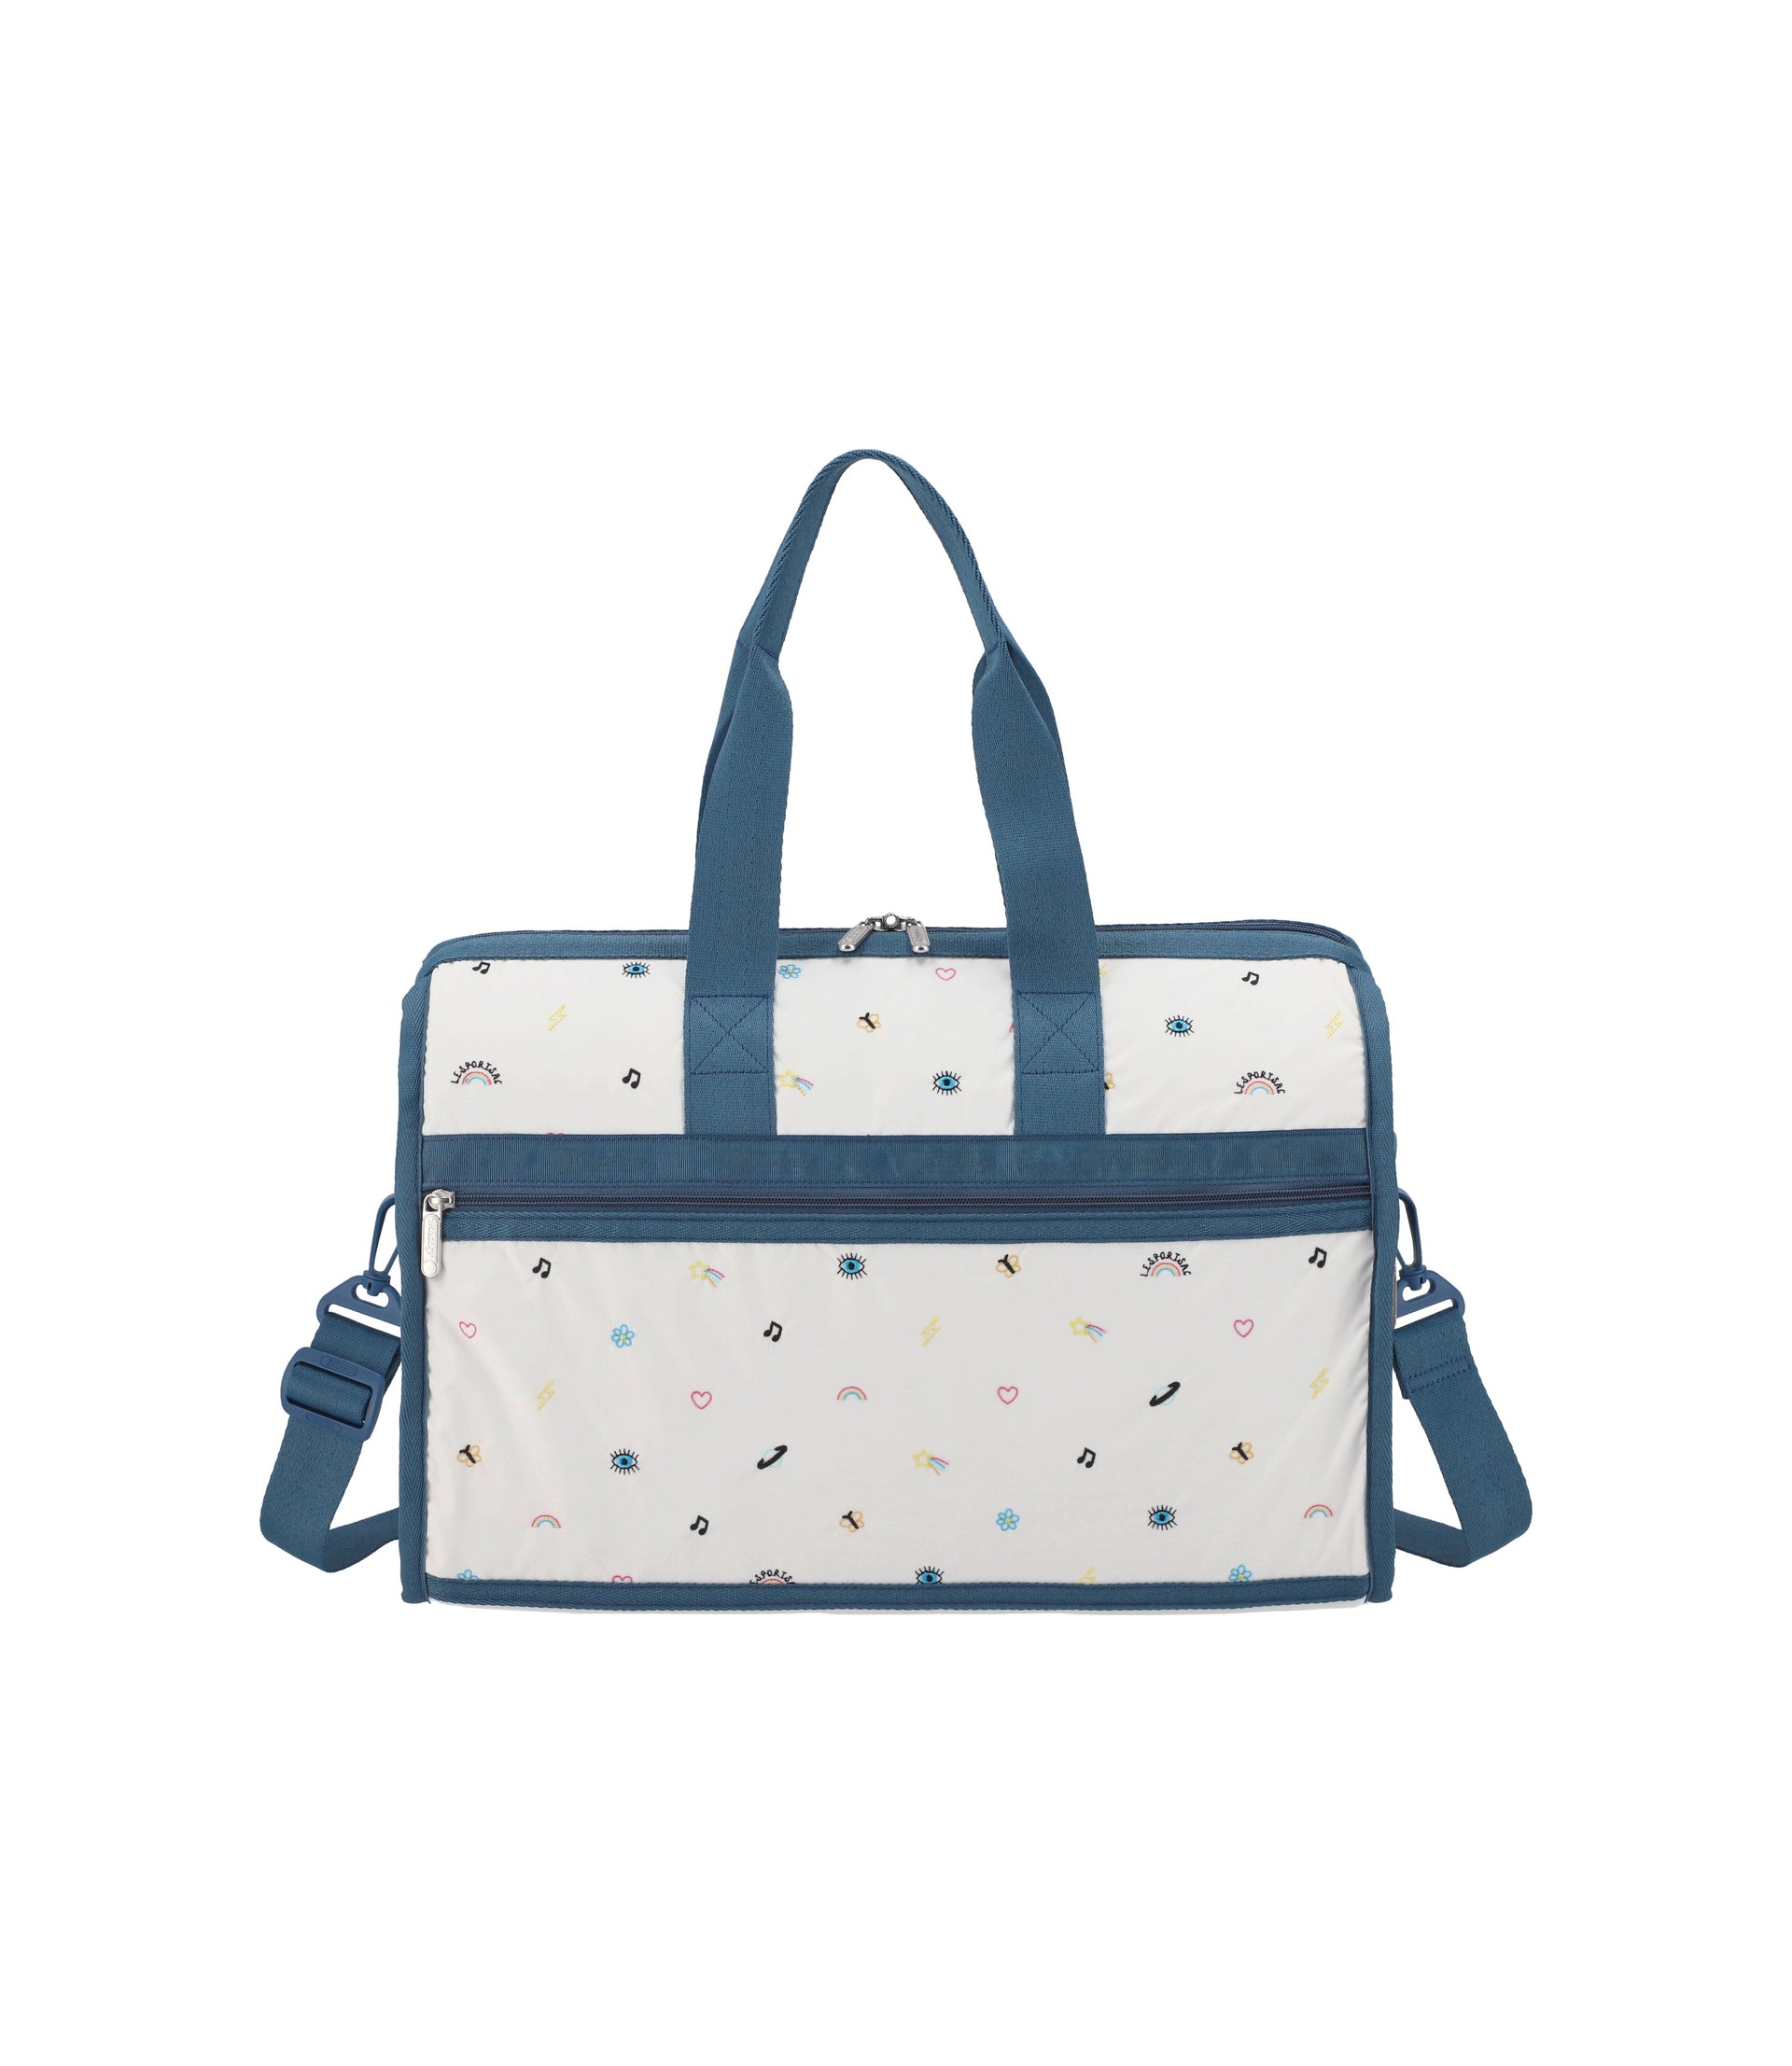 Lesportsac Deluxe Medium Weekender - Daydream Embroidery